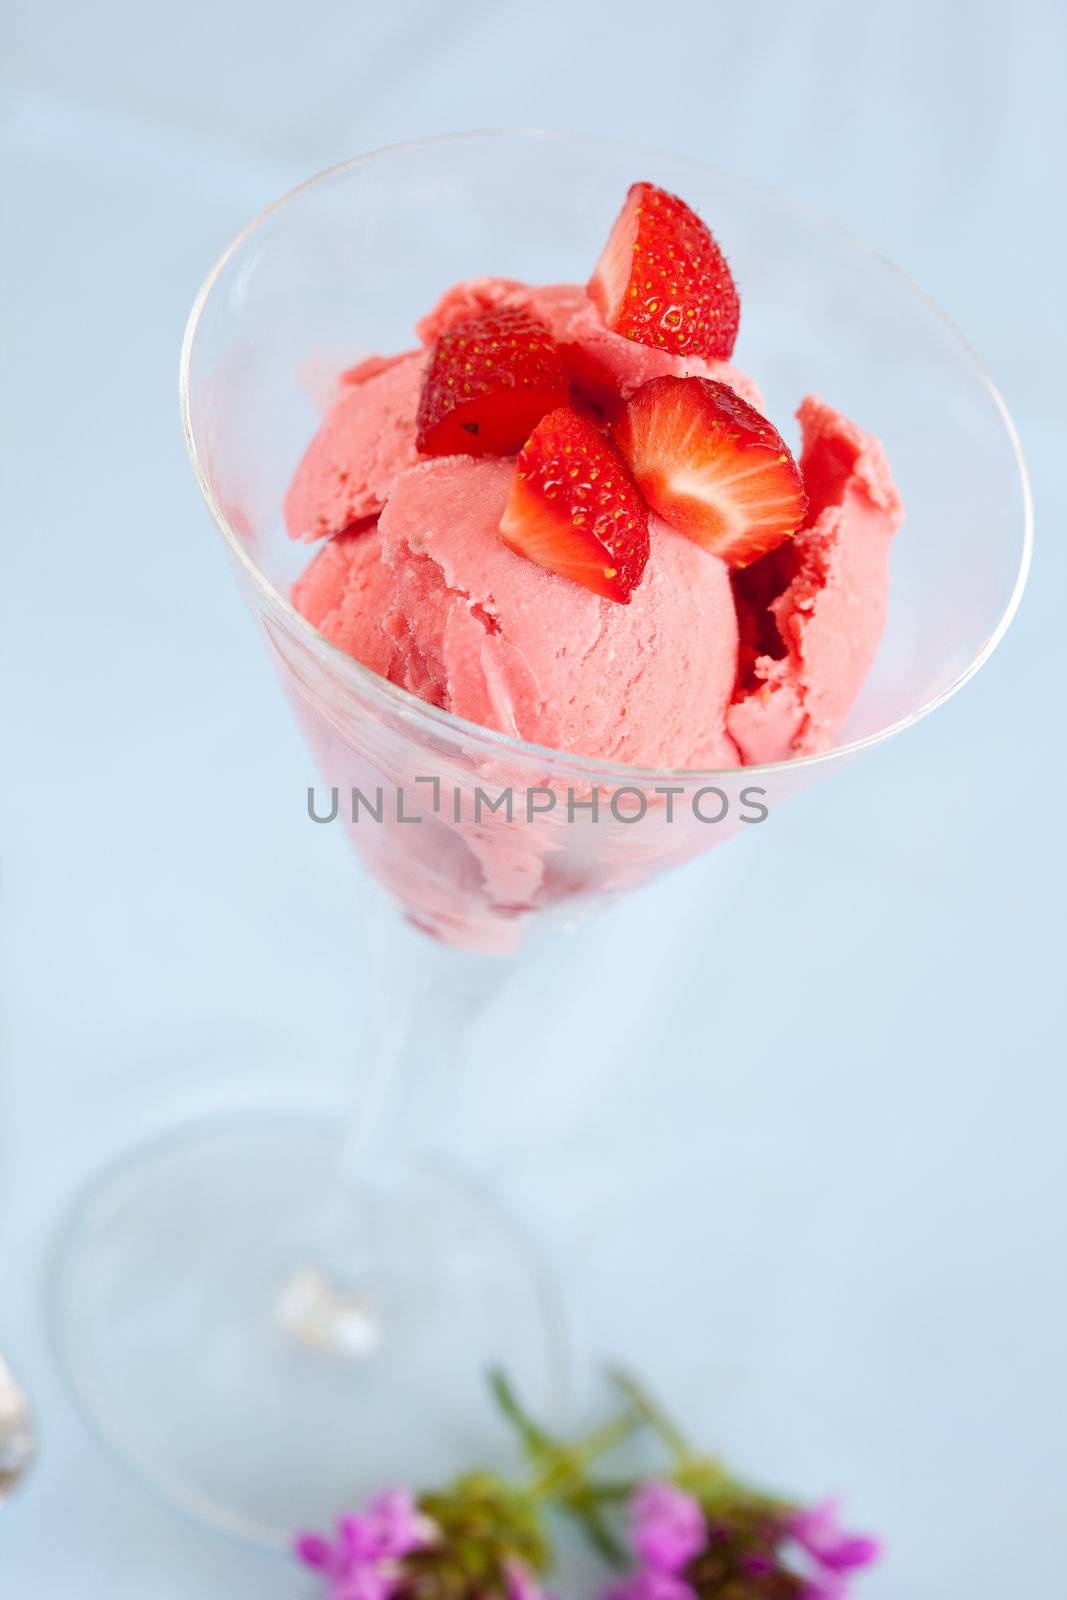 Delicious summer treat with strawberries and icecream